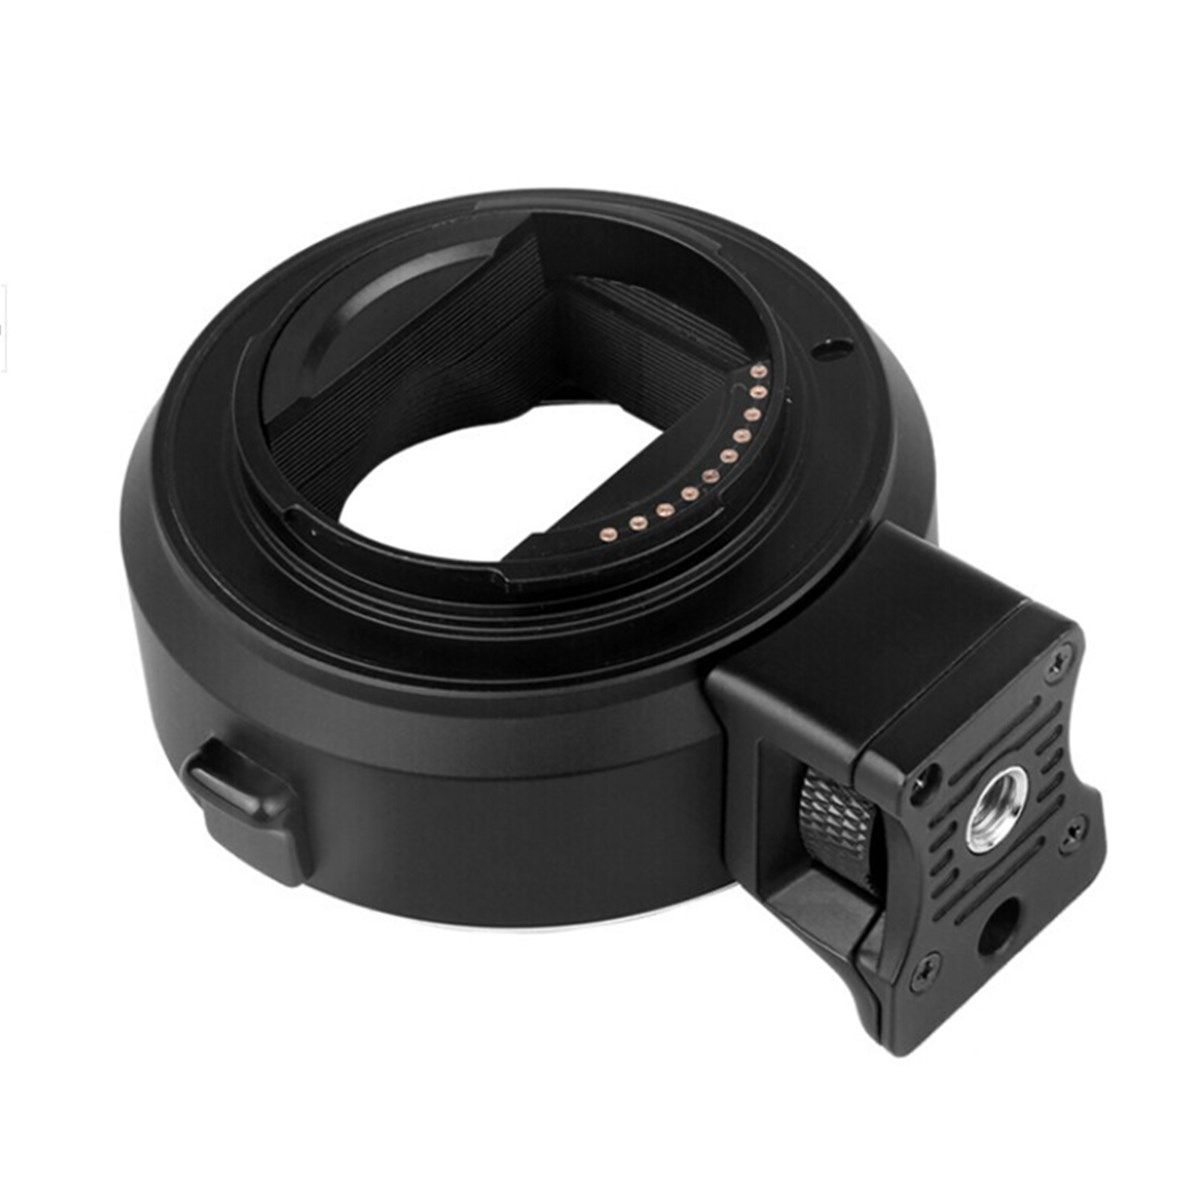 EF-NEX-Auto-Focus-Lens-Adapter-for-Canon-EOS-EF-Mount-Lens-to-Sony-E-Adapter-NEX-A7-A7R-II-1340608